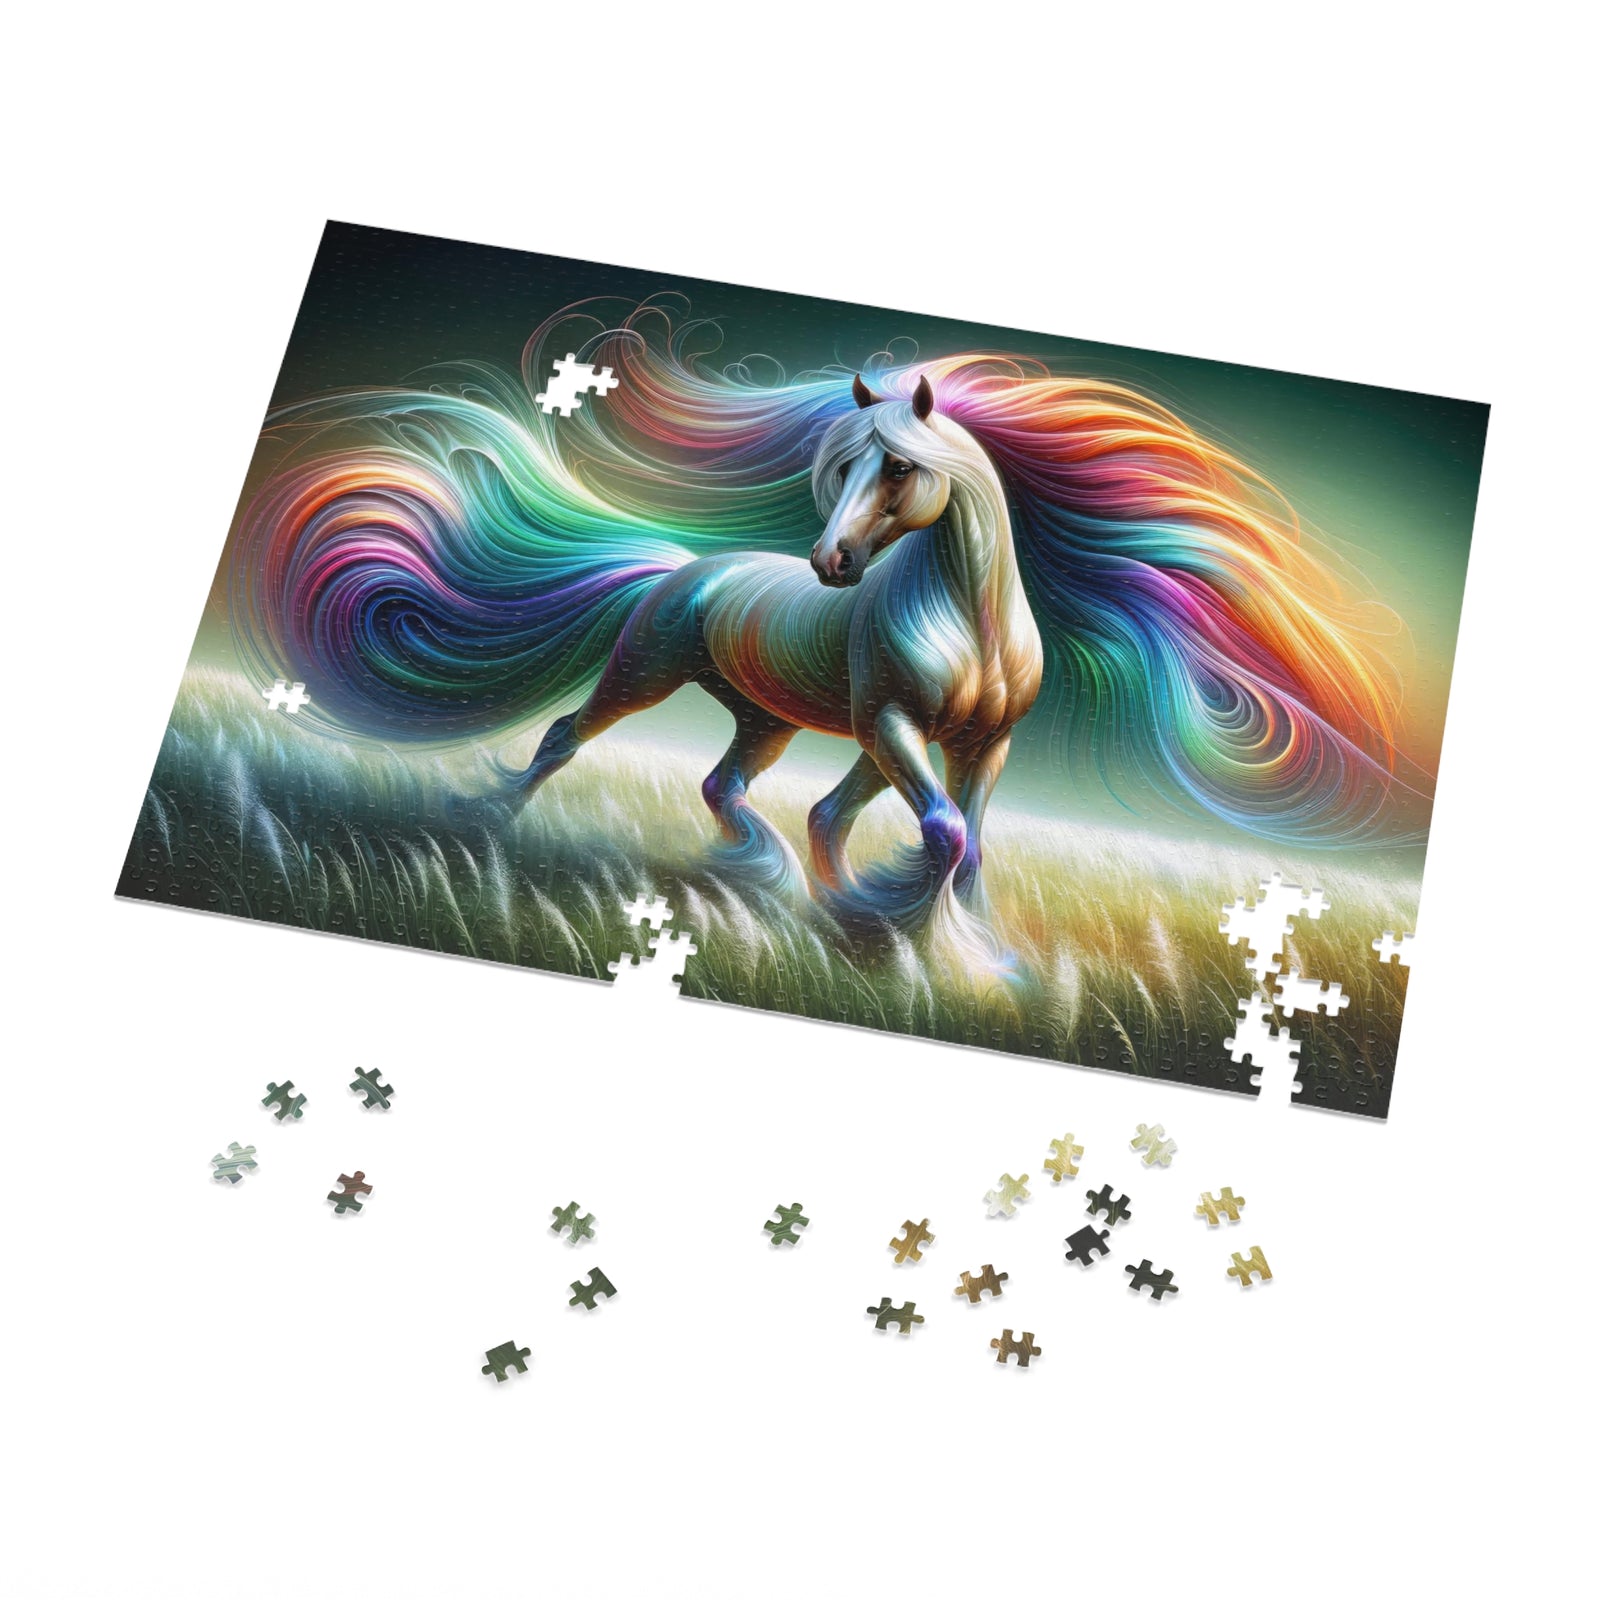 Spectral Serenade Jigsaw Puzzle